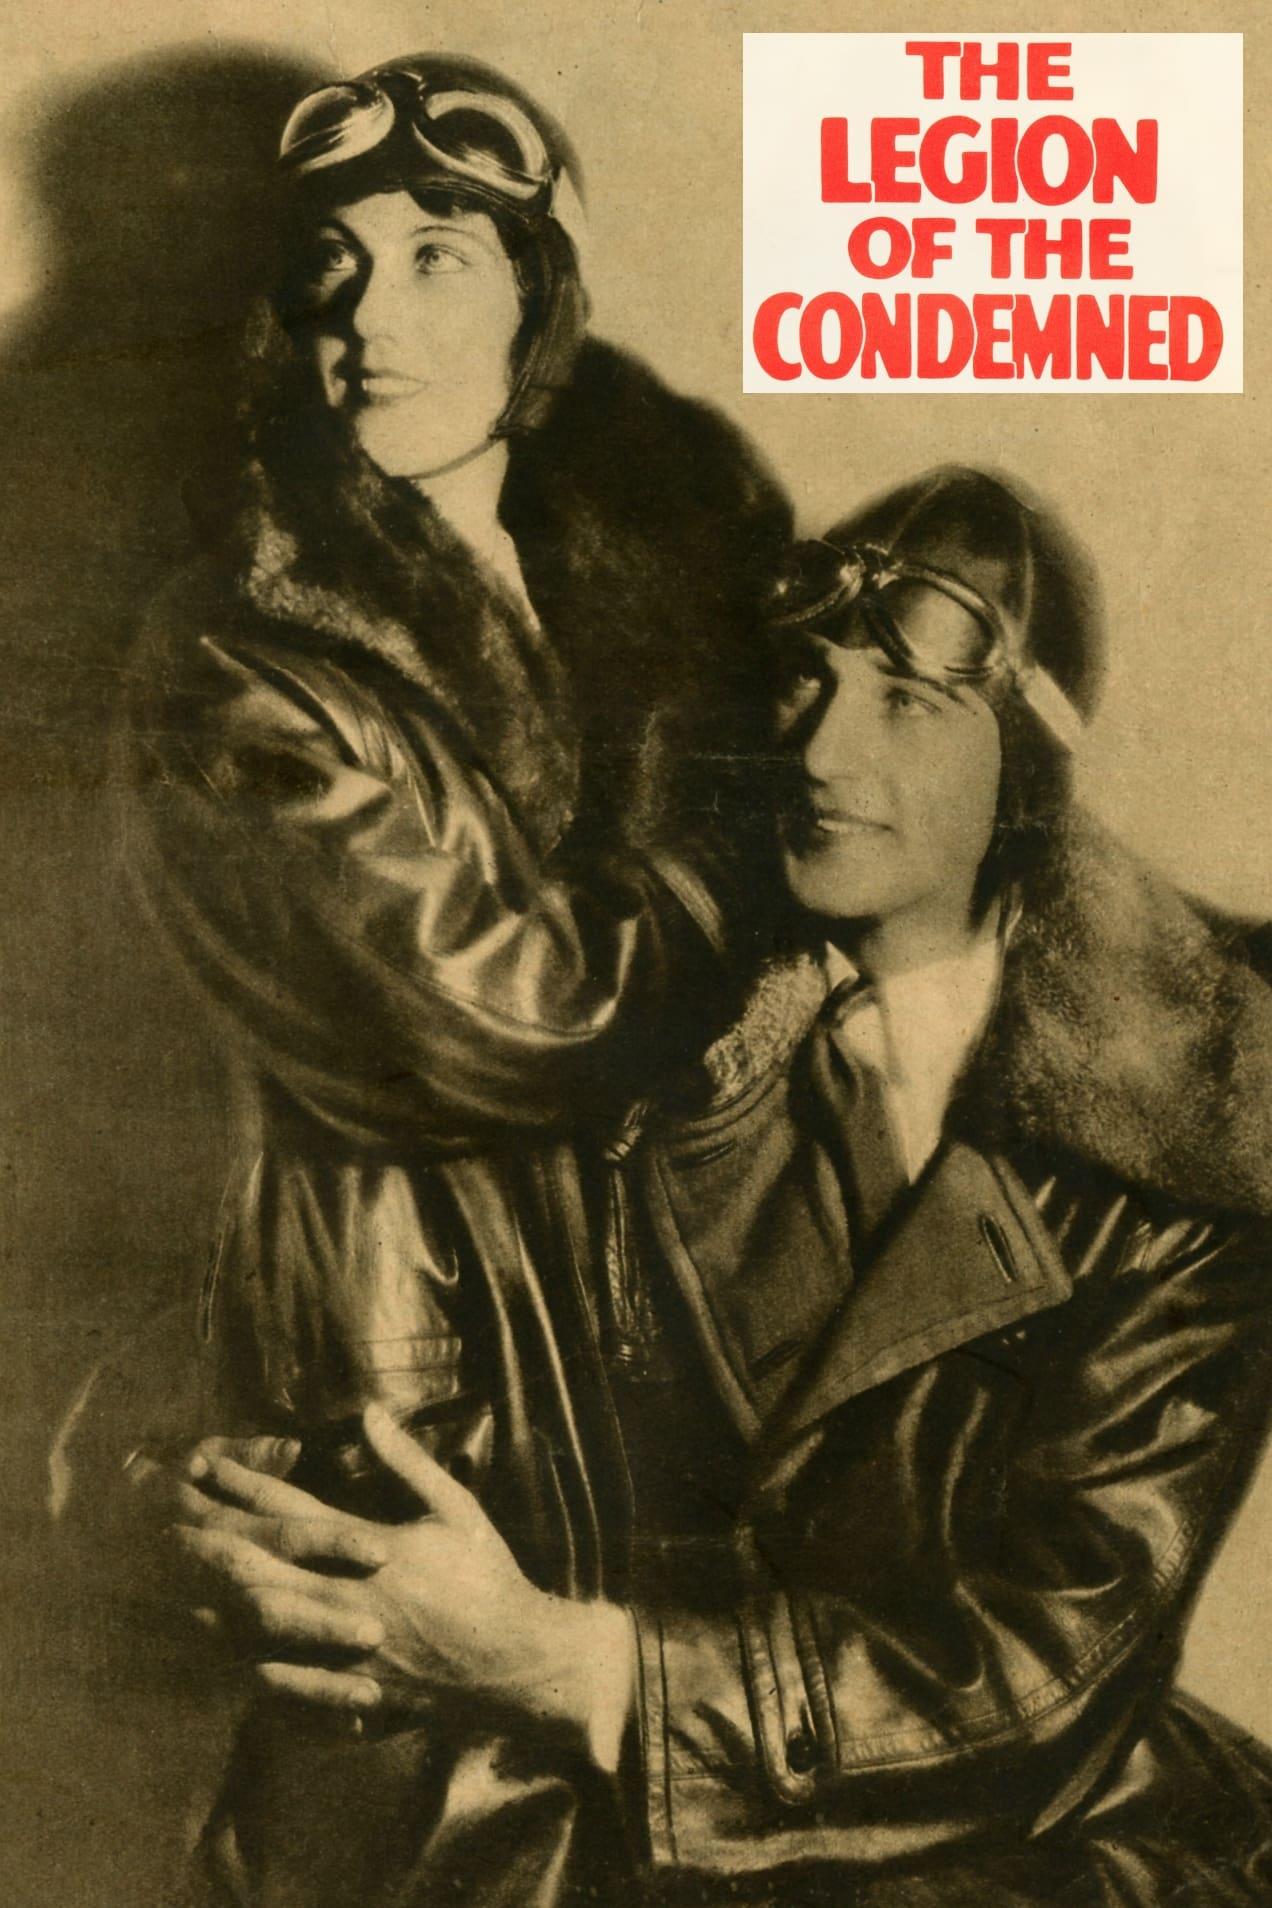 The Legion of the Condemned poster